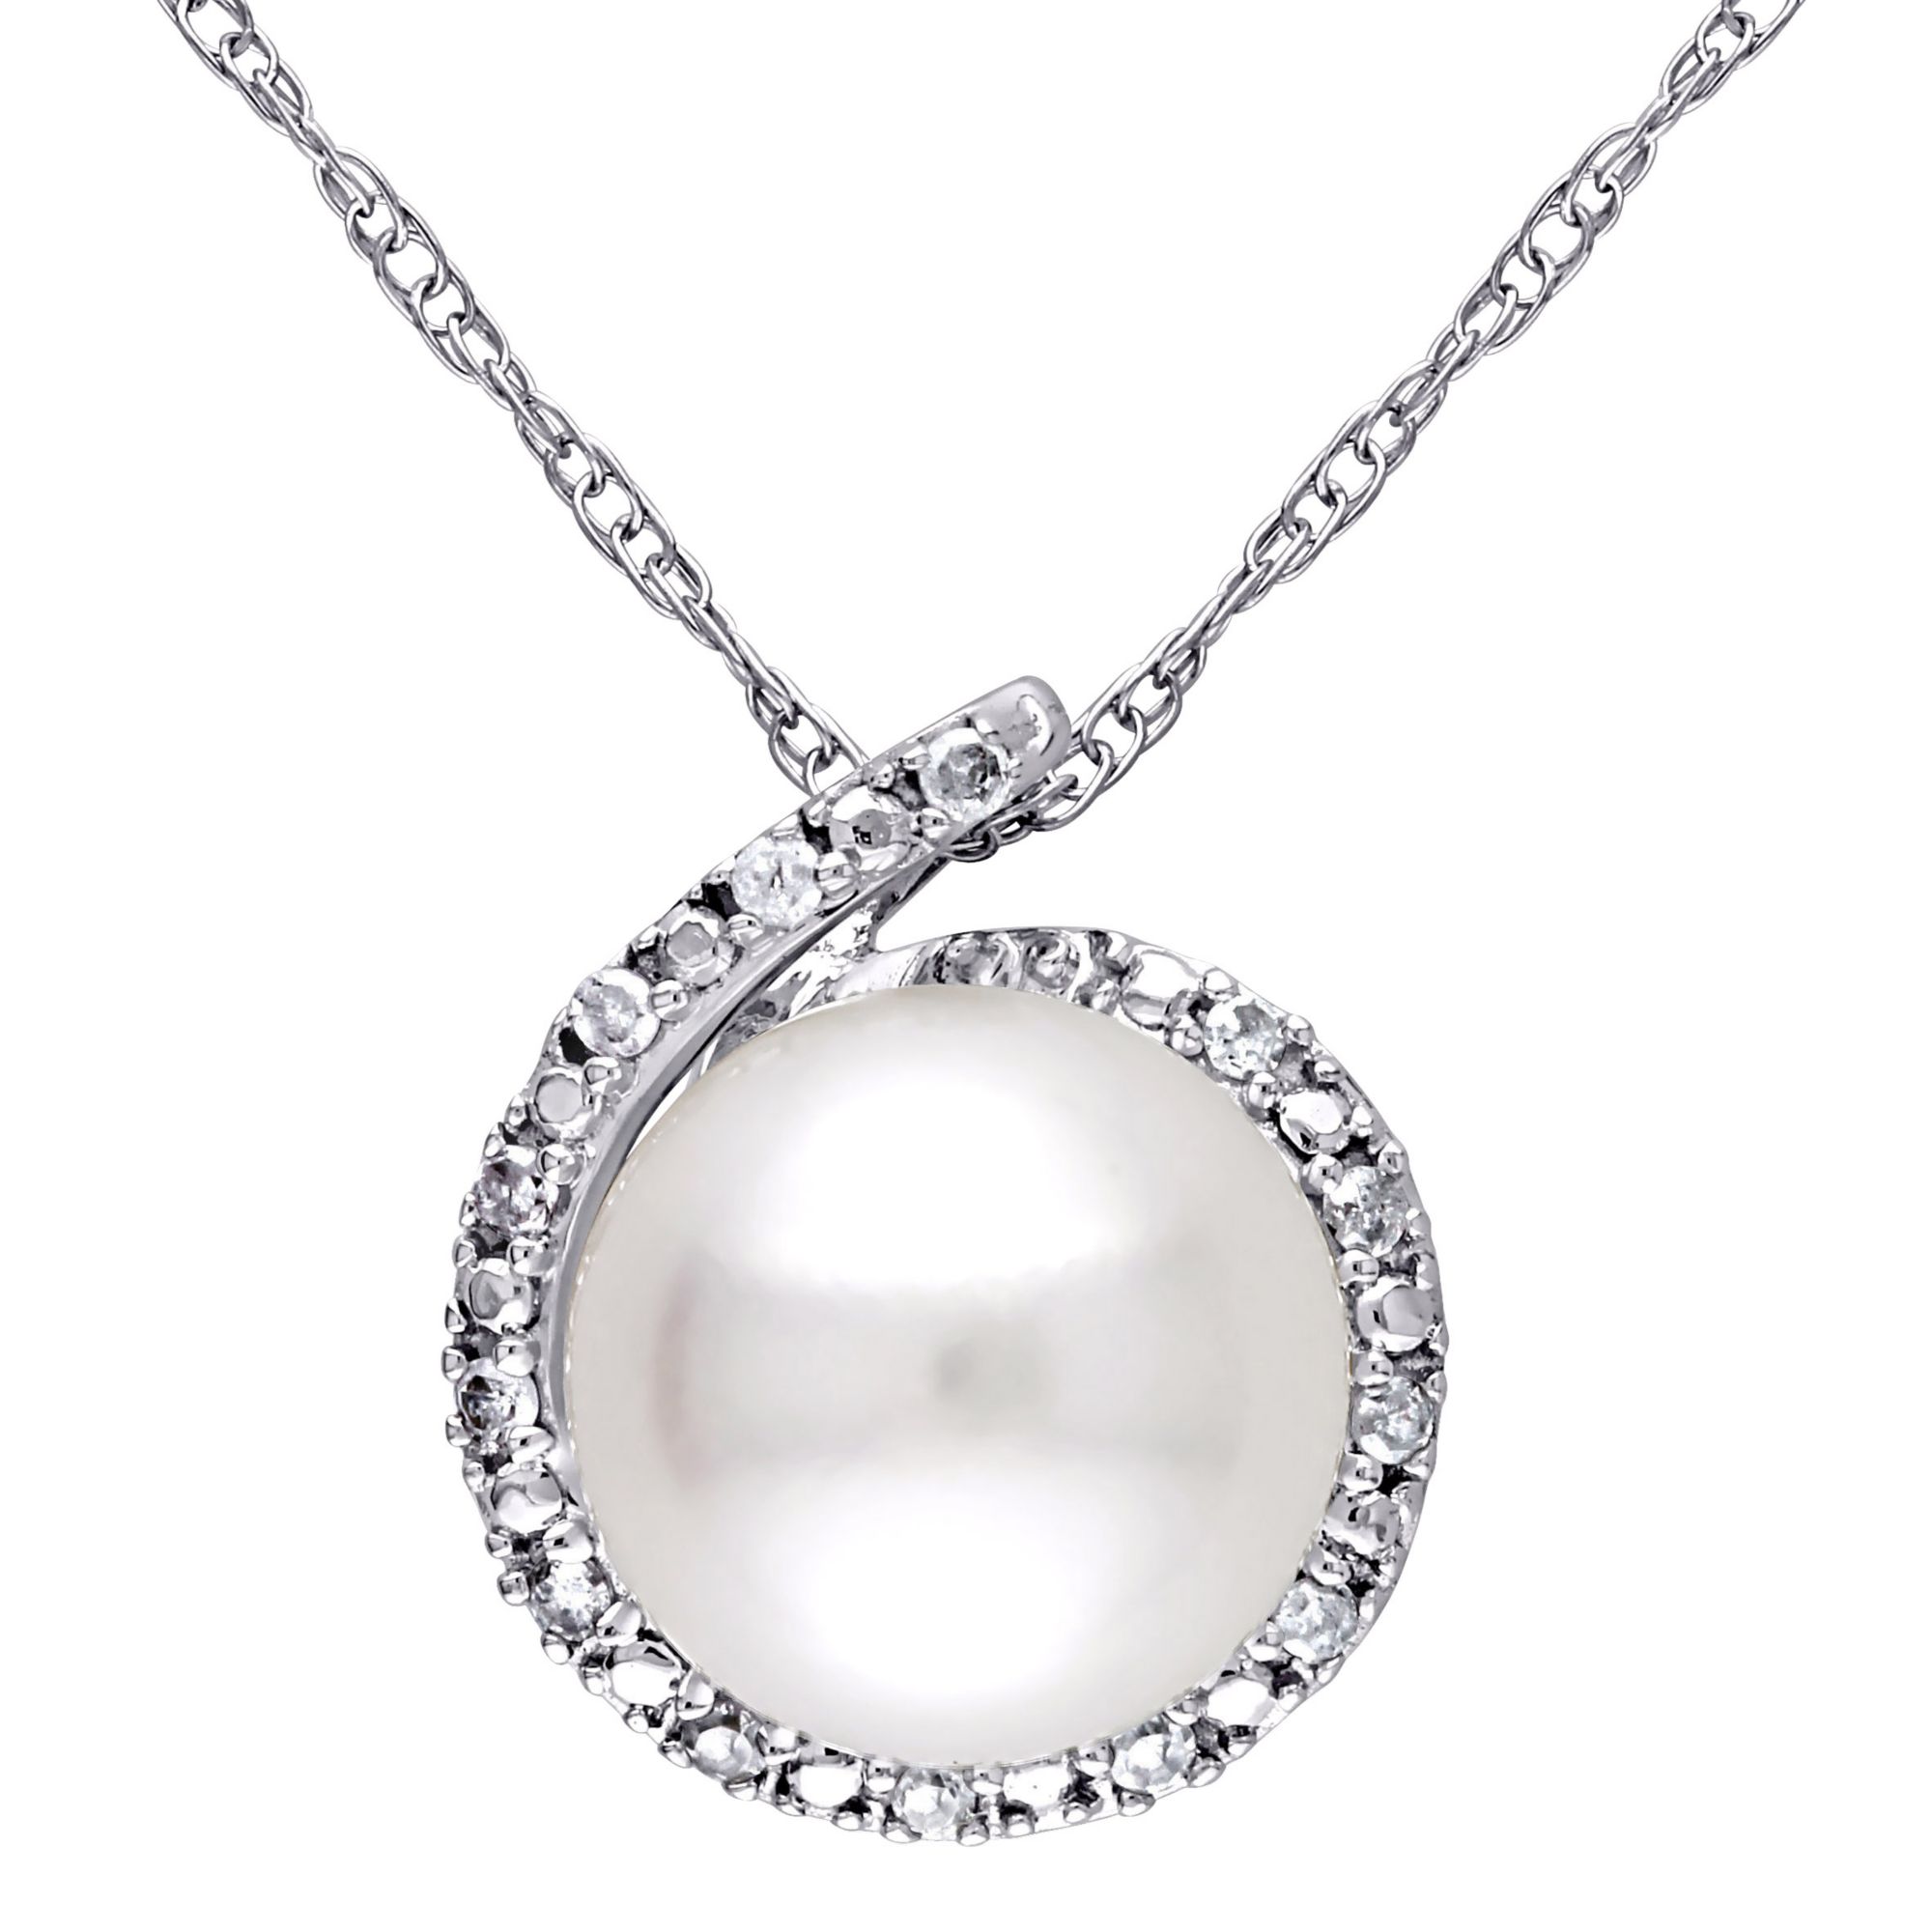 8-8.5 mm Cultured Freshwater Pearl and Diamond Halo Necklace in 10k White Gold